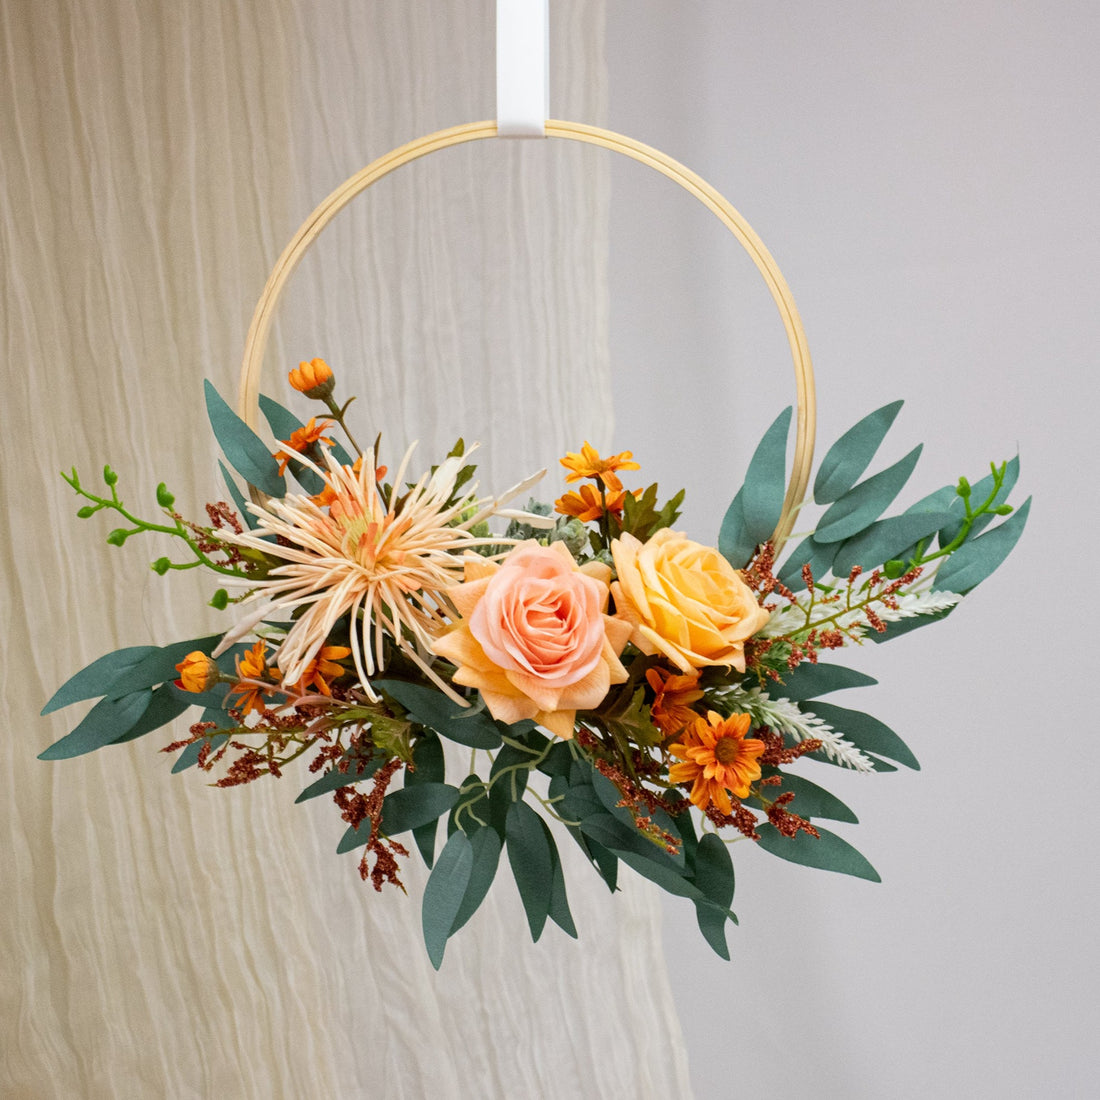 Wood-framed artificial flower bouquet - ideal for special events with roses, chrysanthemums, and daisies.